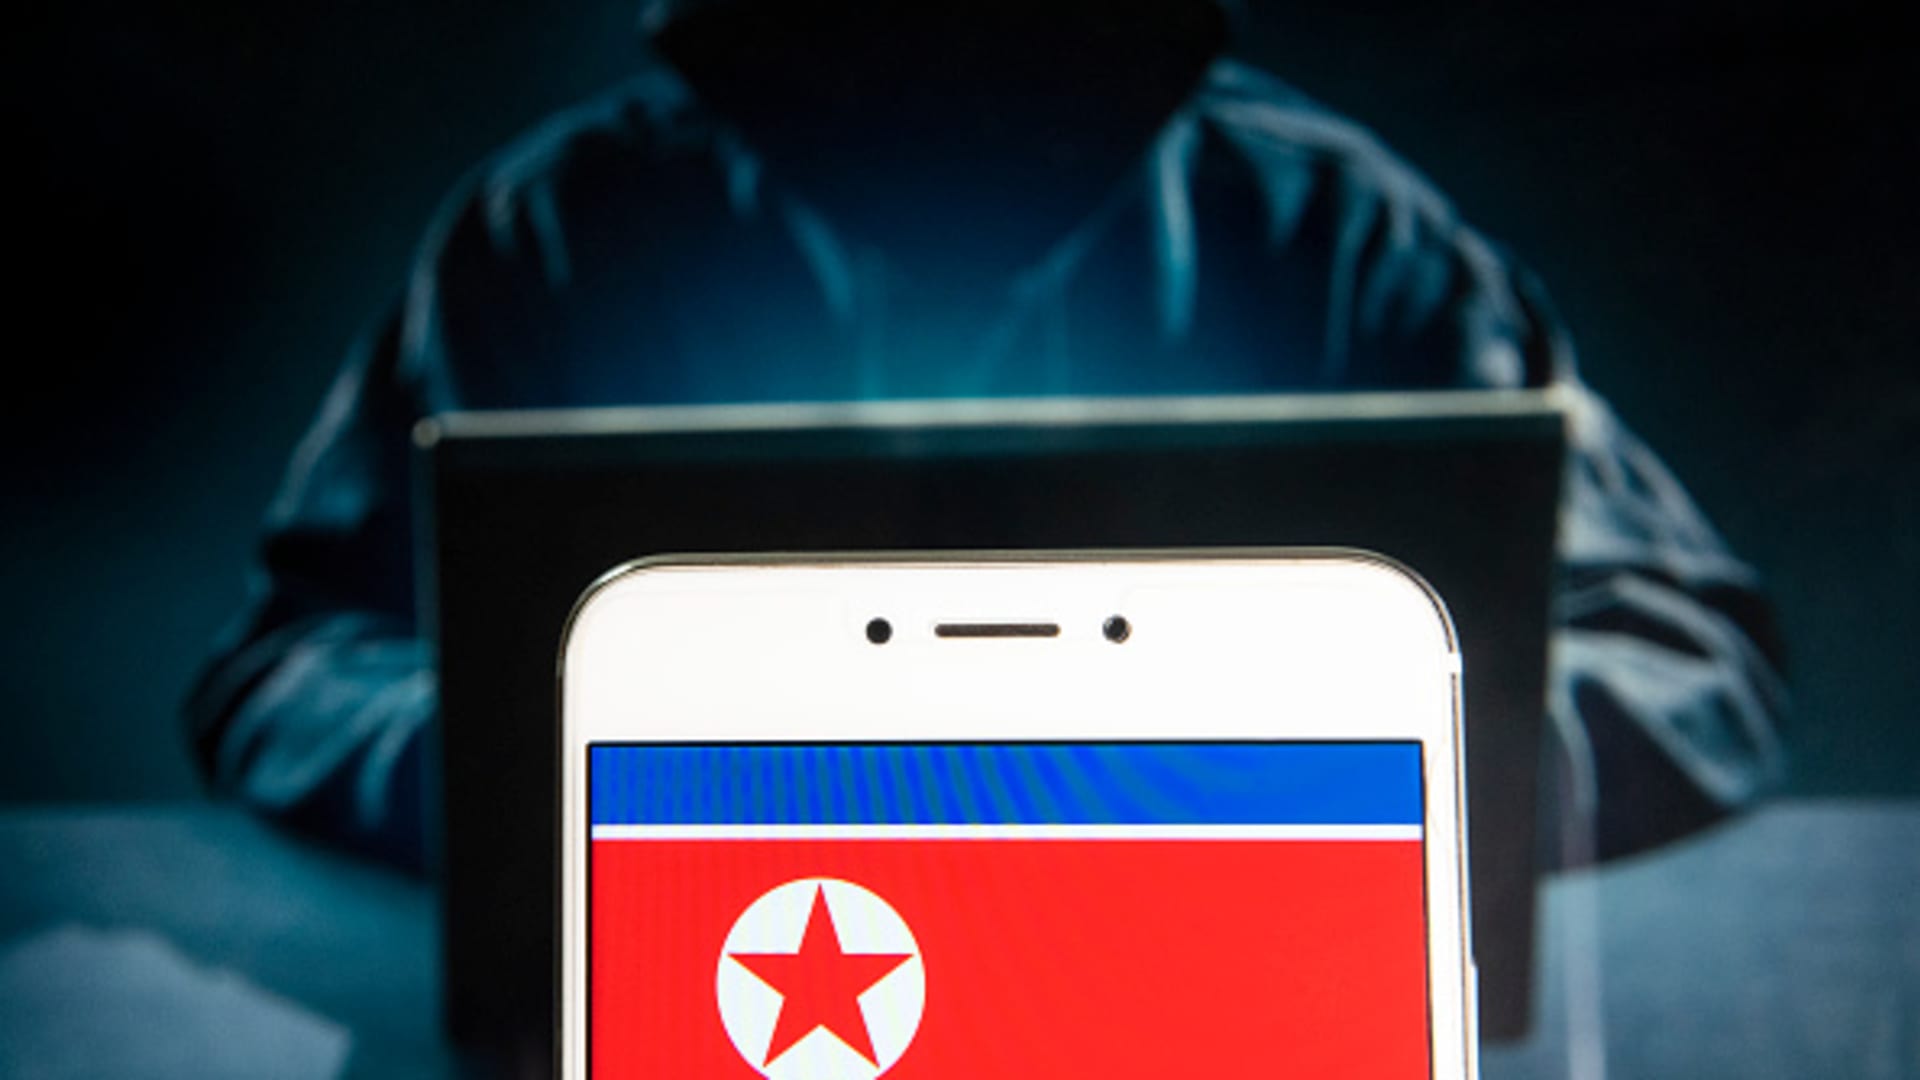 North Korea is likely culprit behind $100 million crypto heist, researchers say - CNBC